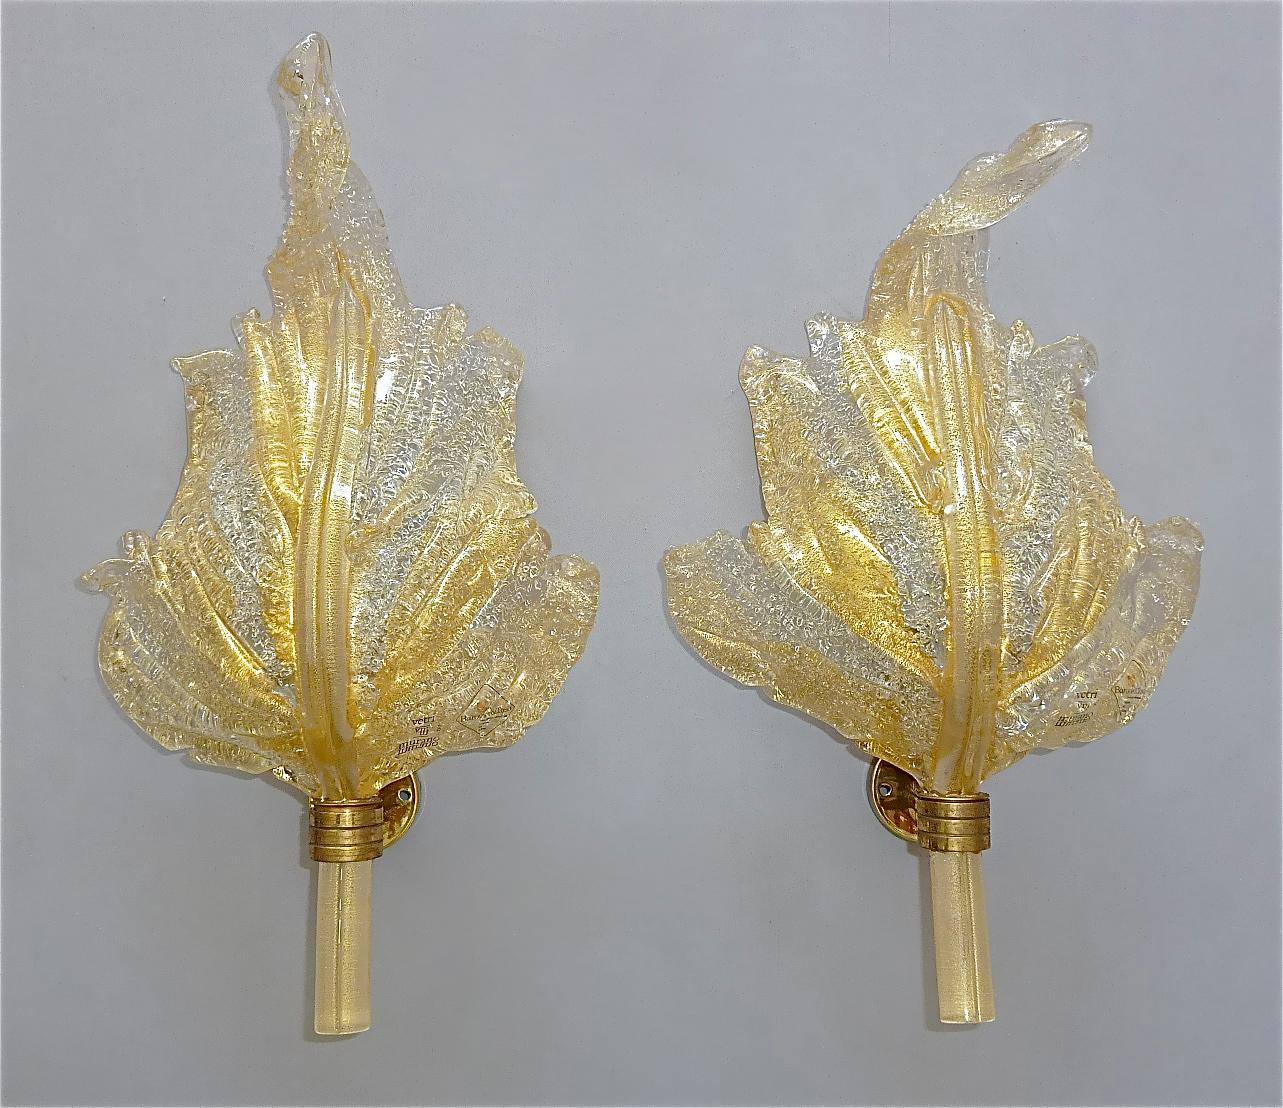 Large Signed Pair Barovier & Toso Leaf Sconces Italian Murano Glass Floral 1970s For Sale 11